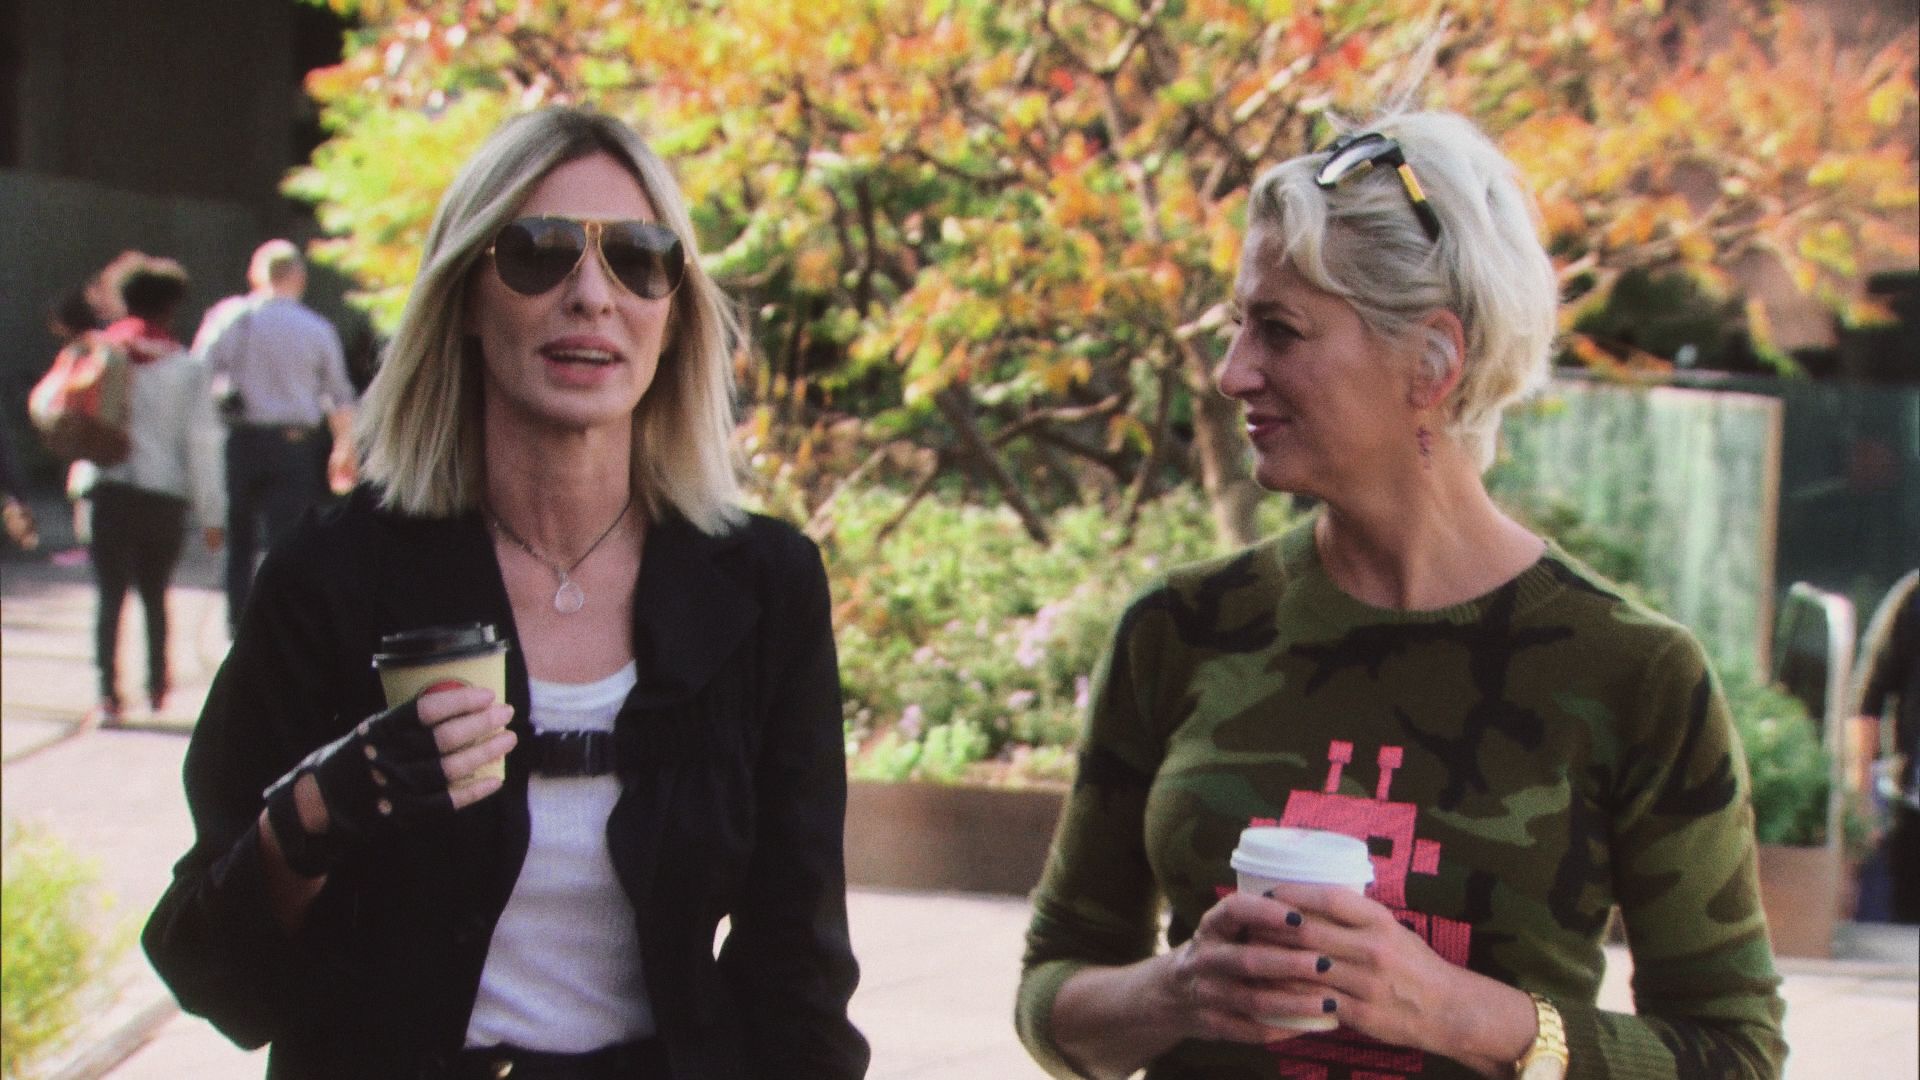 RHONY The Real Housewives of New York City S10E02 saison 10 épisode 2 Running Your Mouth